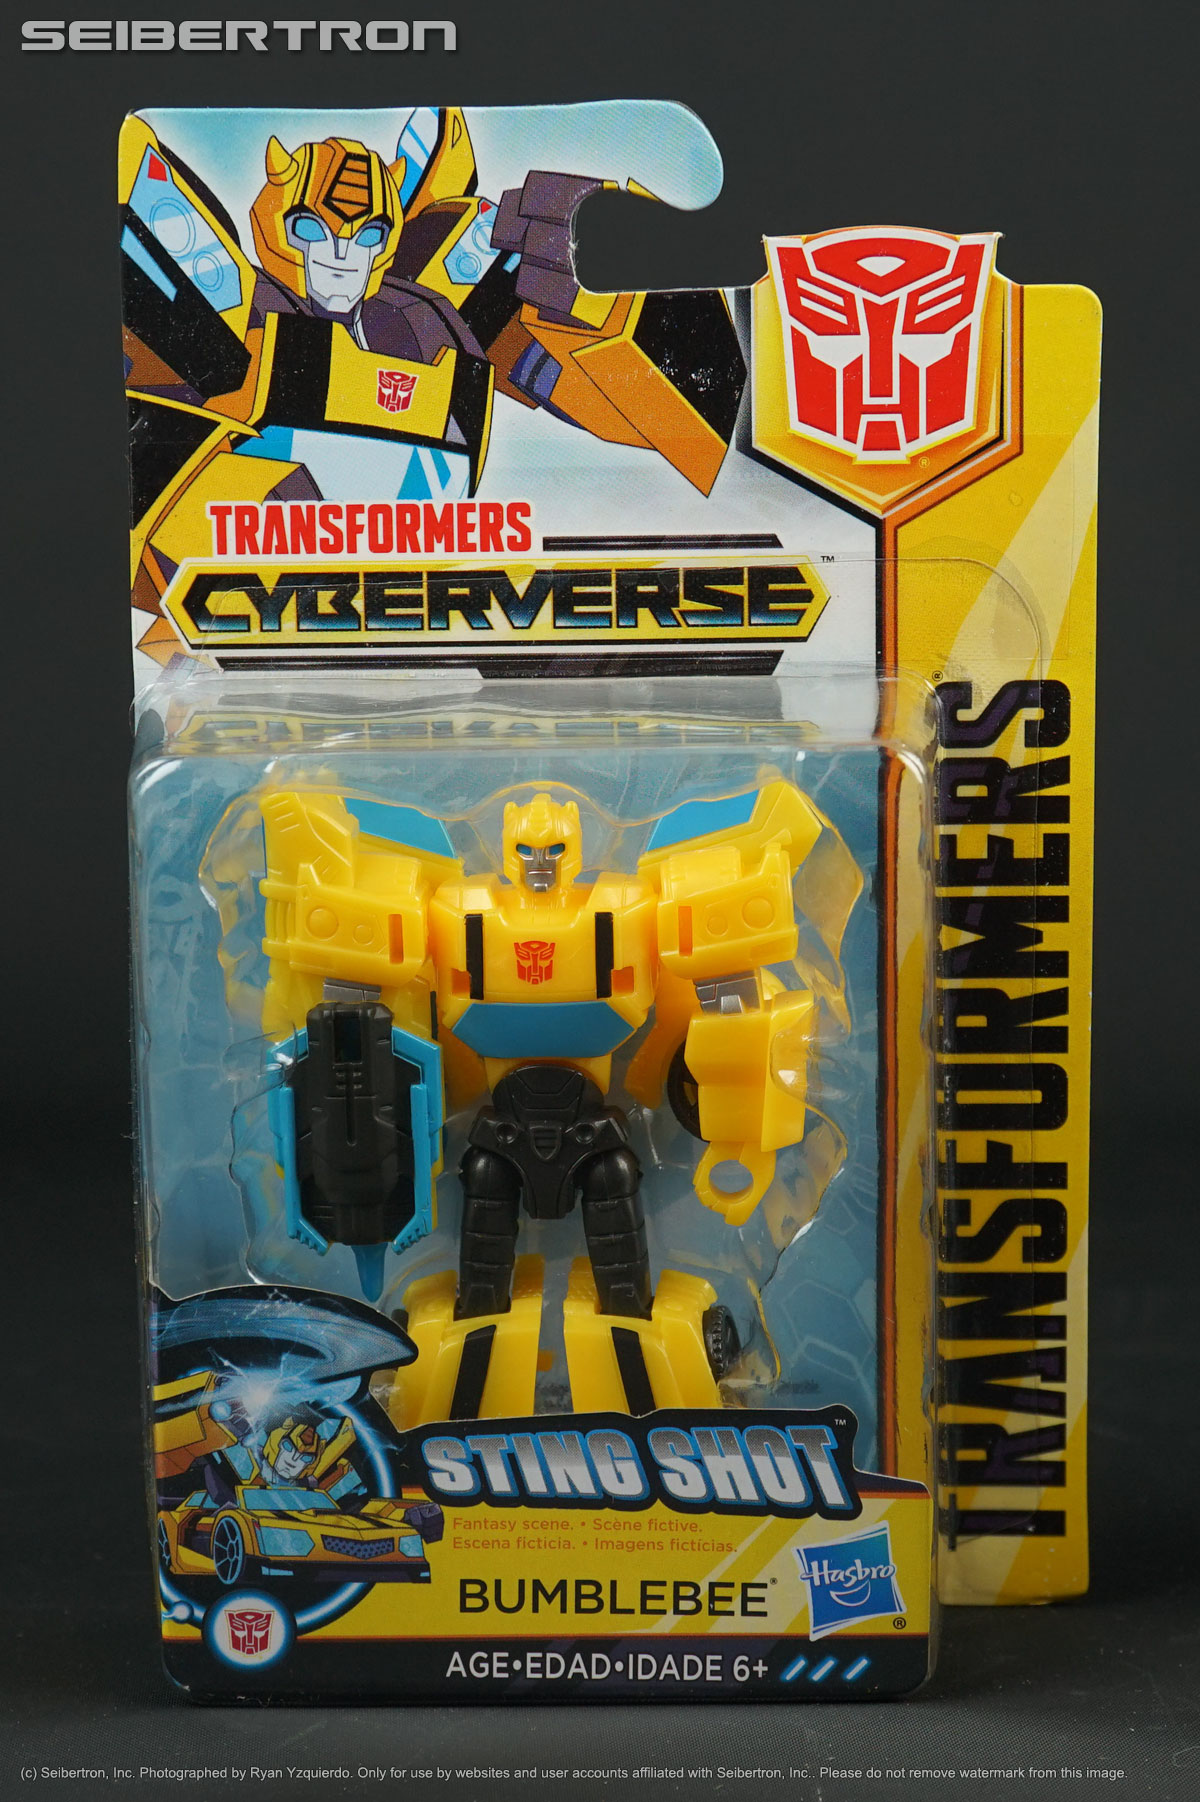 Sting Shot BUMBLEBEE Transformers Cyberverse Scout Class Hasbro 2018 NEW Ages 6+